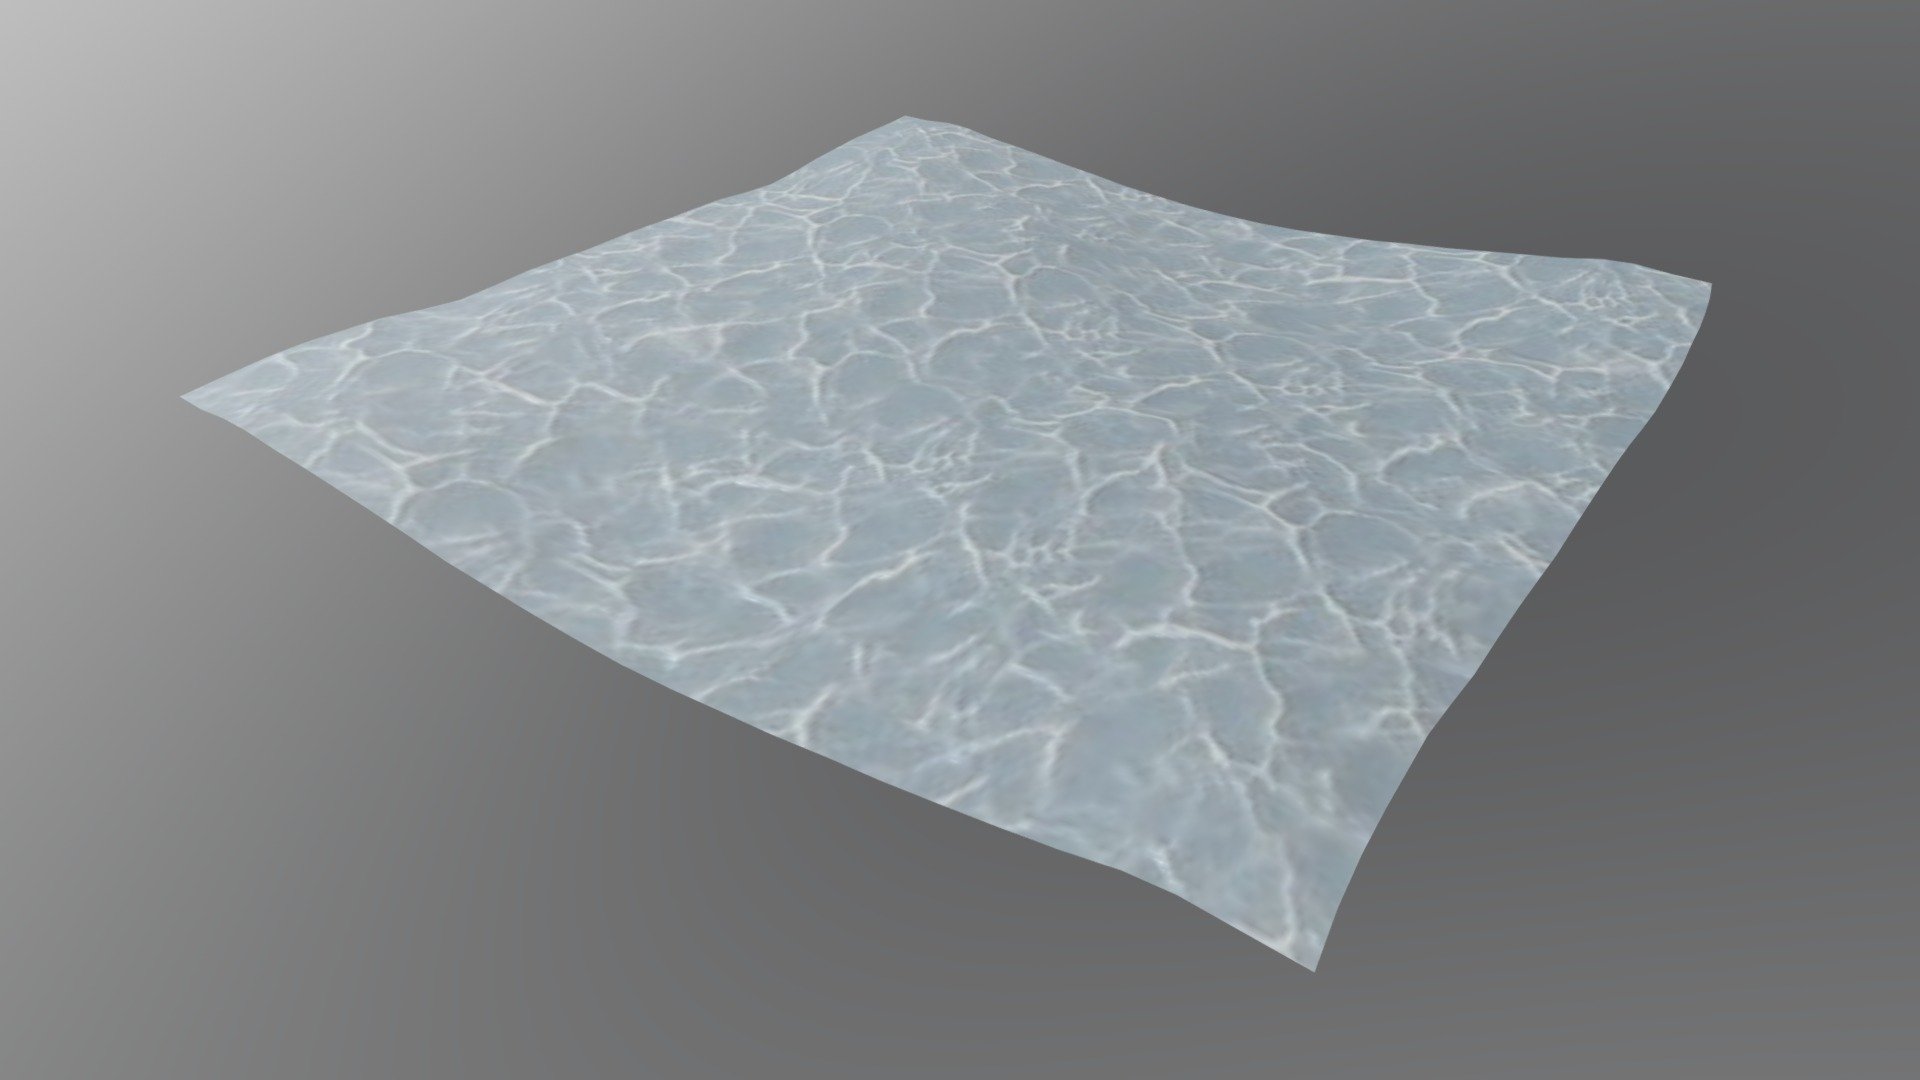 I created this for the spatial platform. You can use it for any purpose.

sample in spatial, please go to ( Oasis ) spaces click on the link below.

https://www.spatial.io/@7plusdesign

 - Water Waves - Download Free 3D model by 7PLUS 3d model